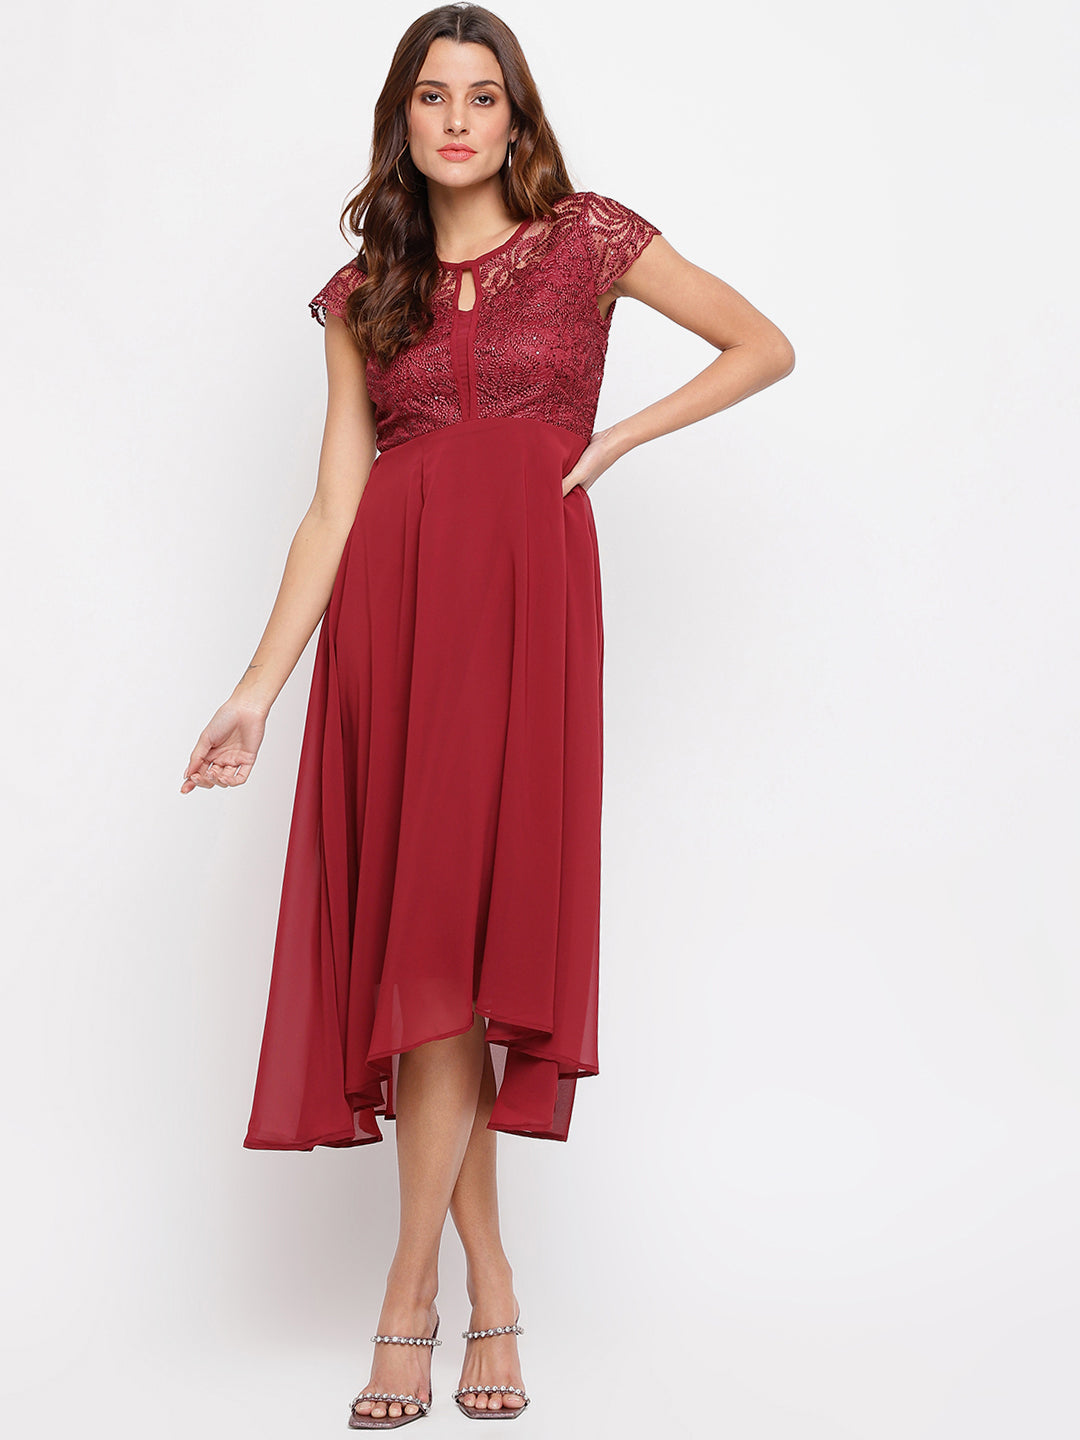 Maroon Cap Sleeve Maxi Dress With Lace